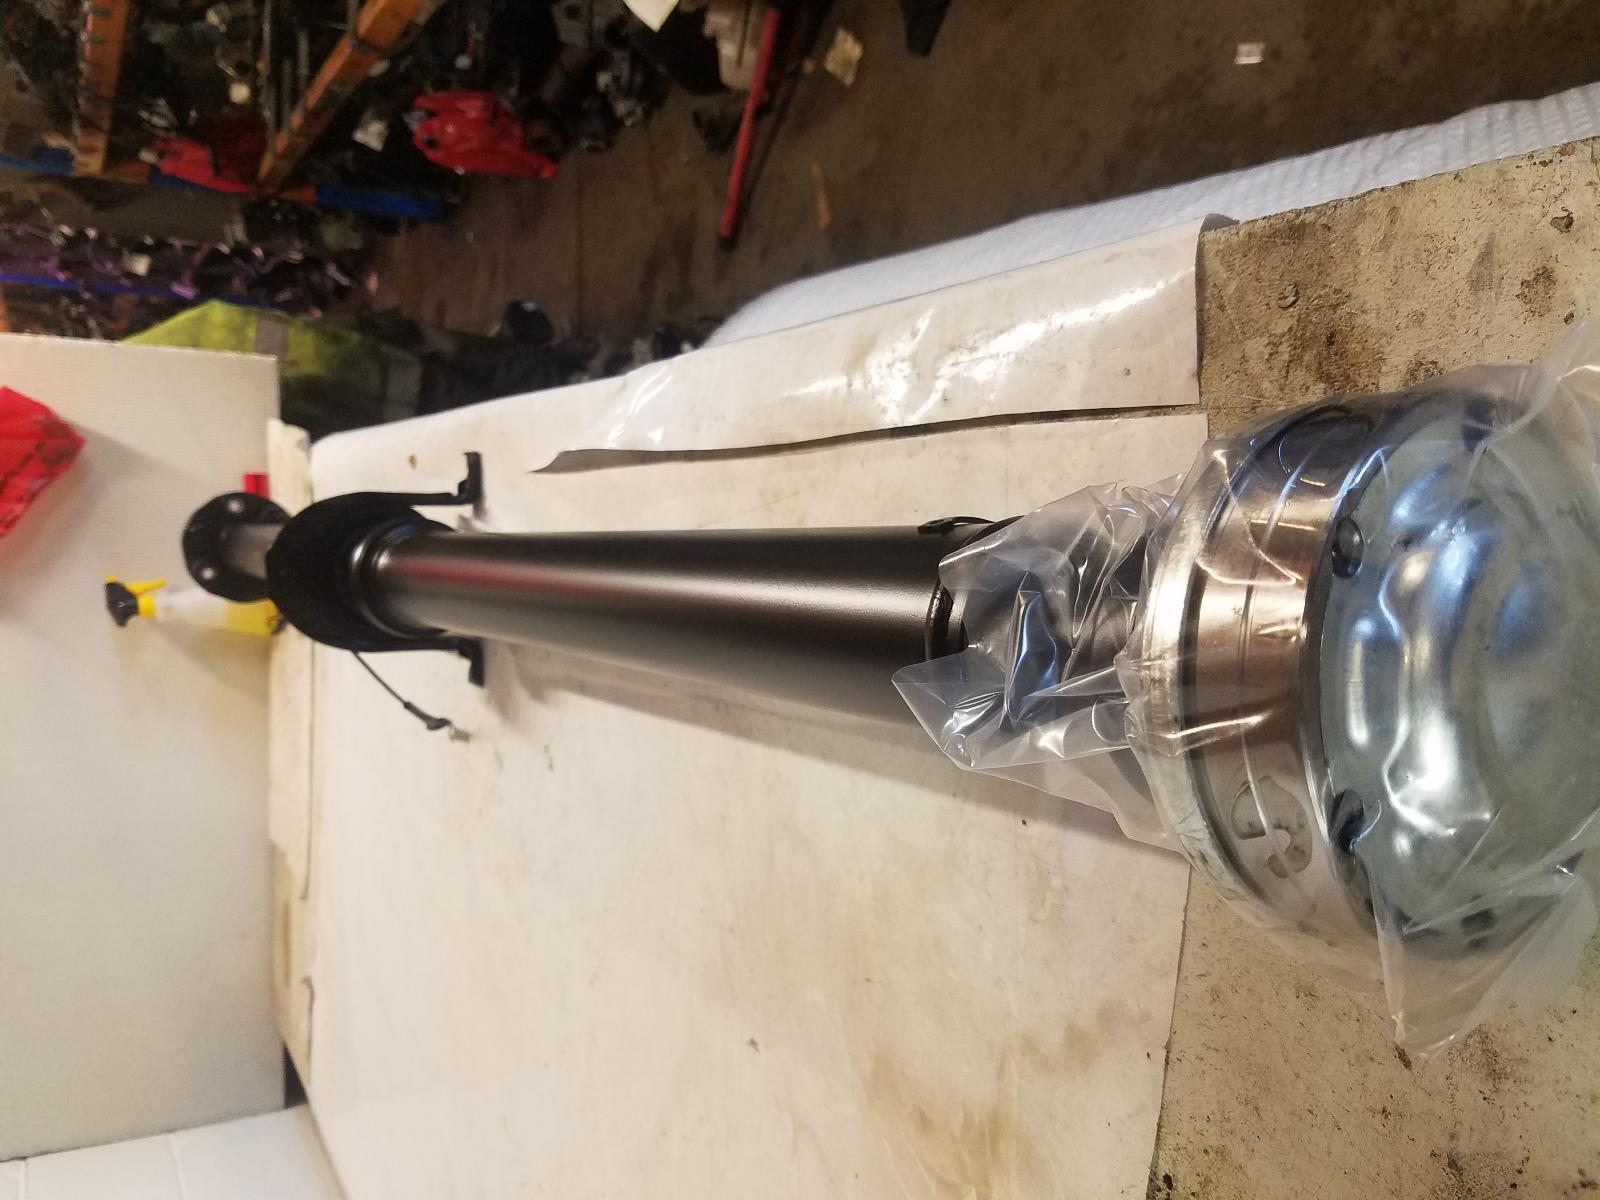 SZ FORD TERRITORY TURBO DIESEL AWD NEW AFTERMARKET TAILSHAFT